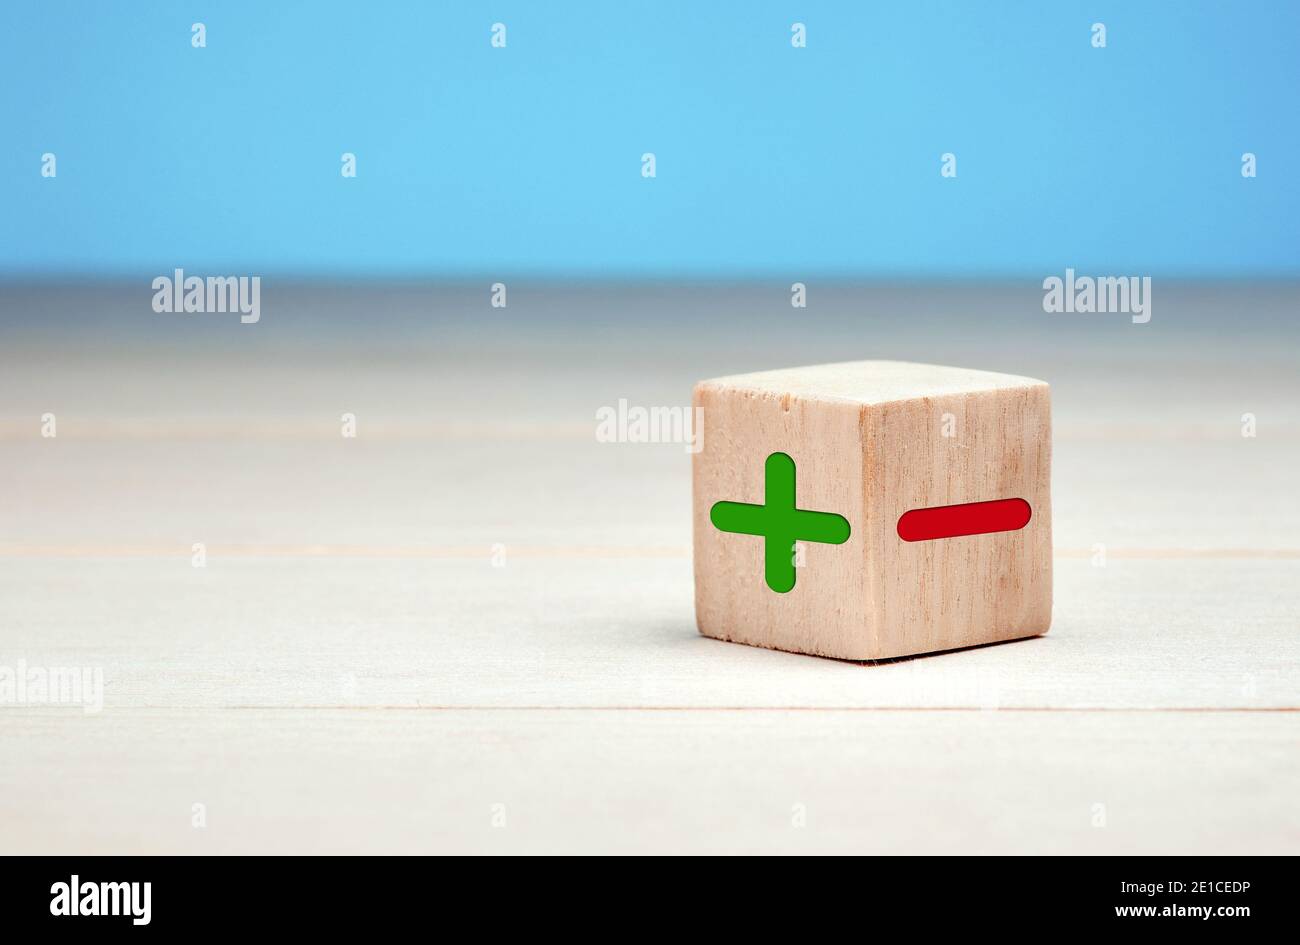 Wooden block with plus and minus icons. Assessment, evaluation, choice or decision making concept. Stock Photo